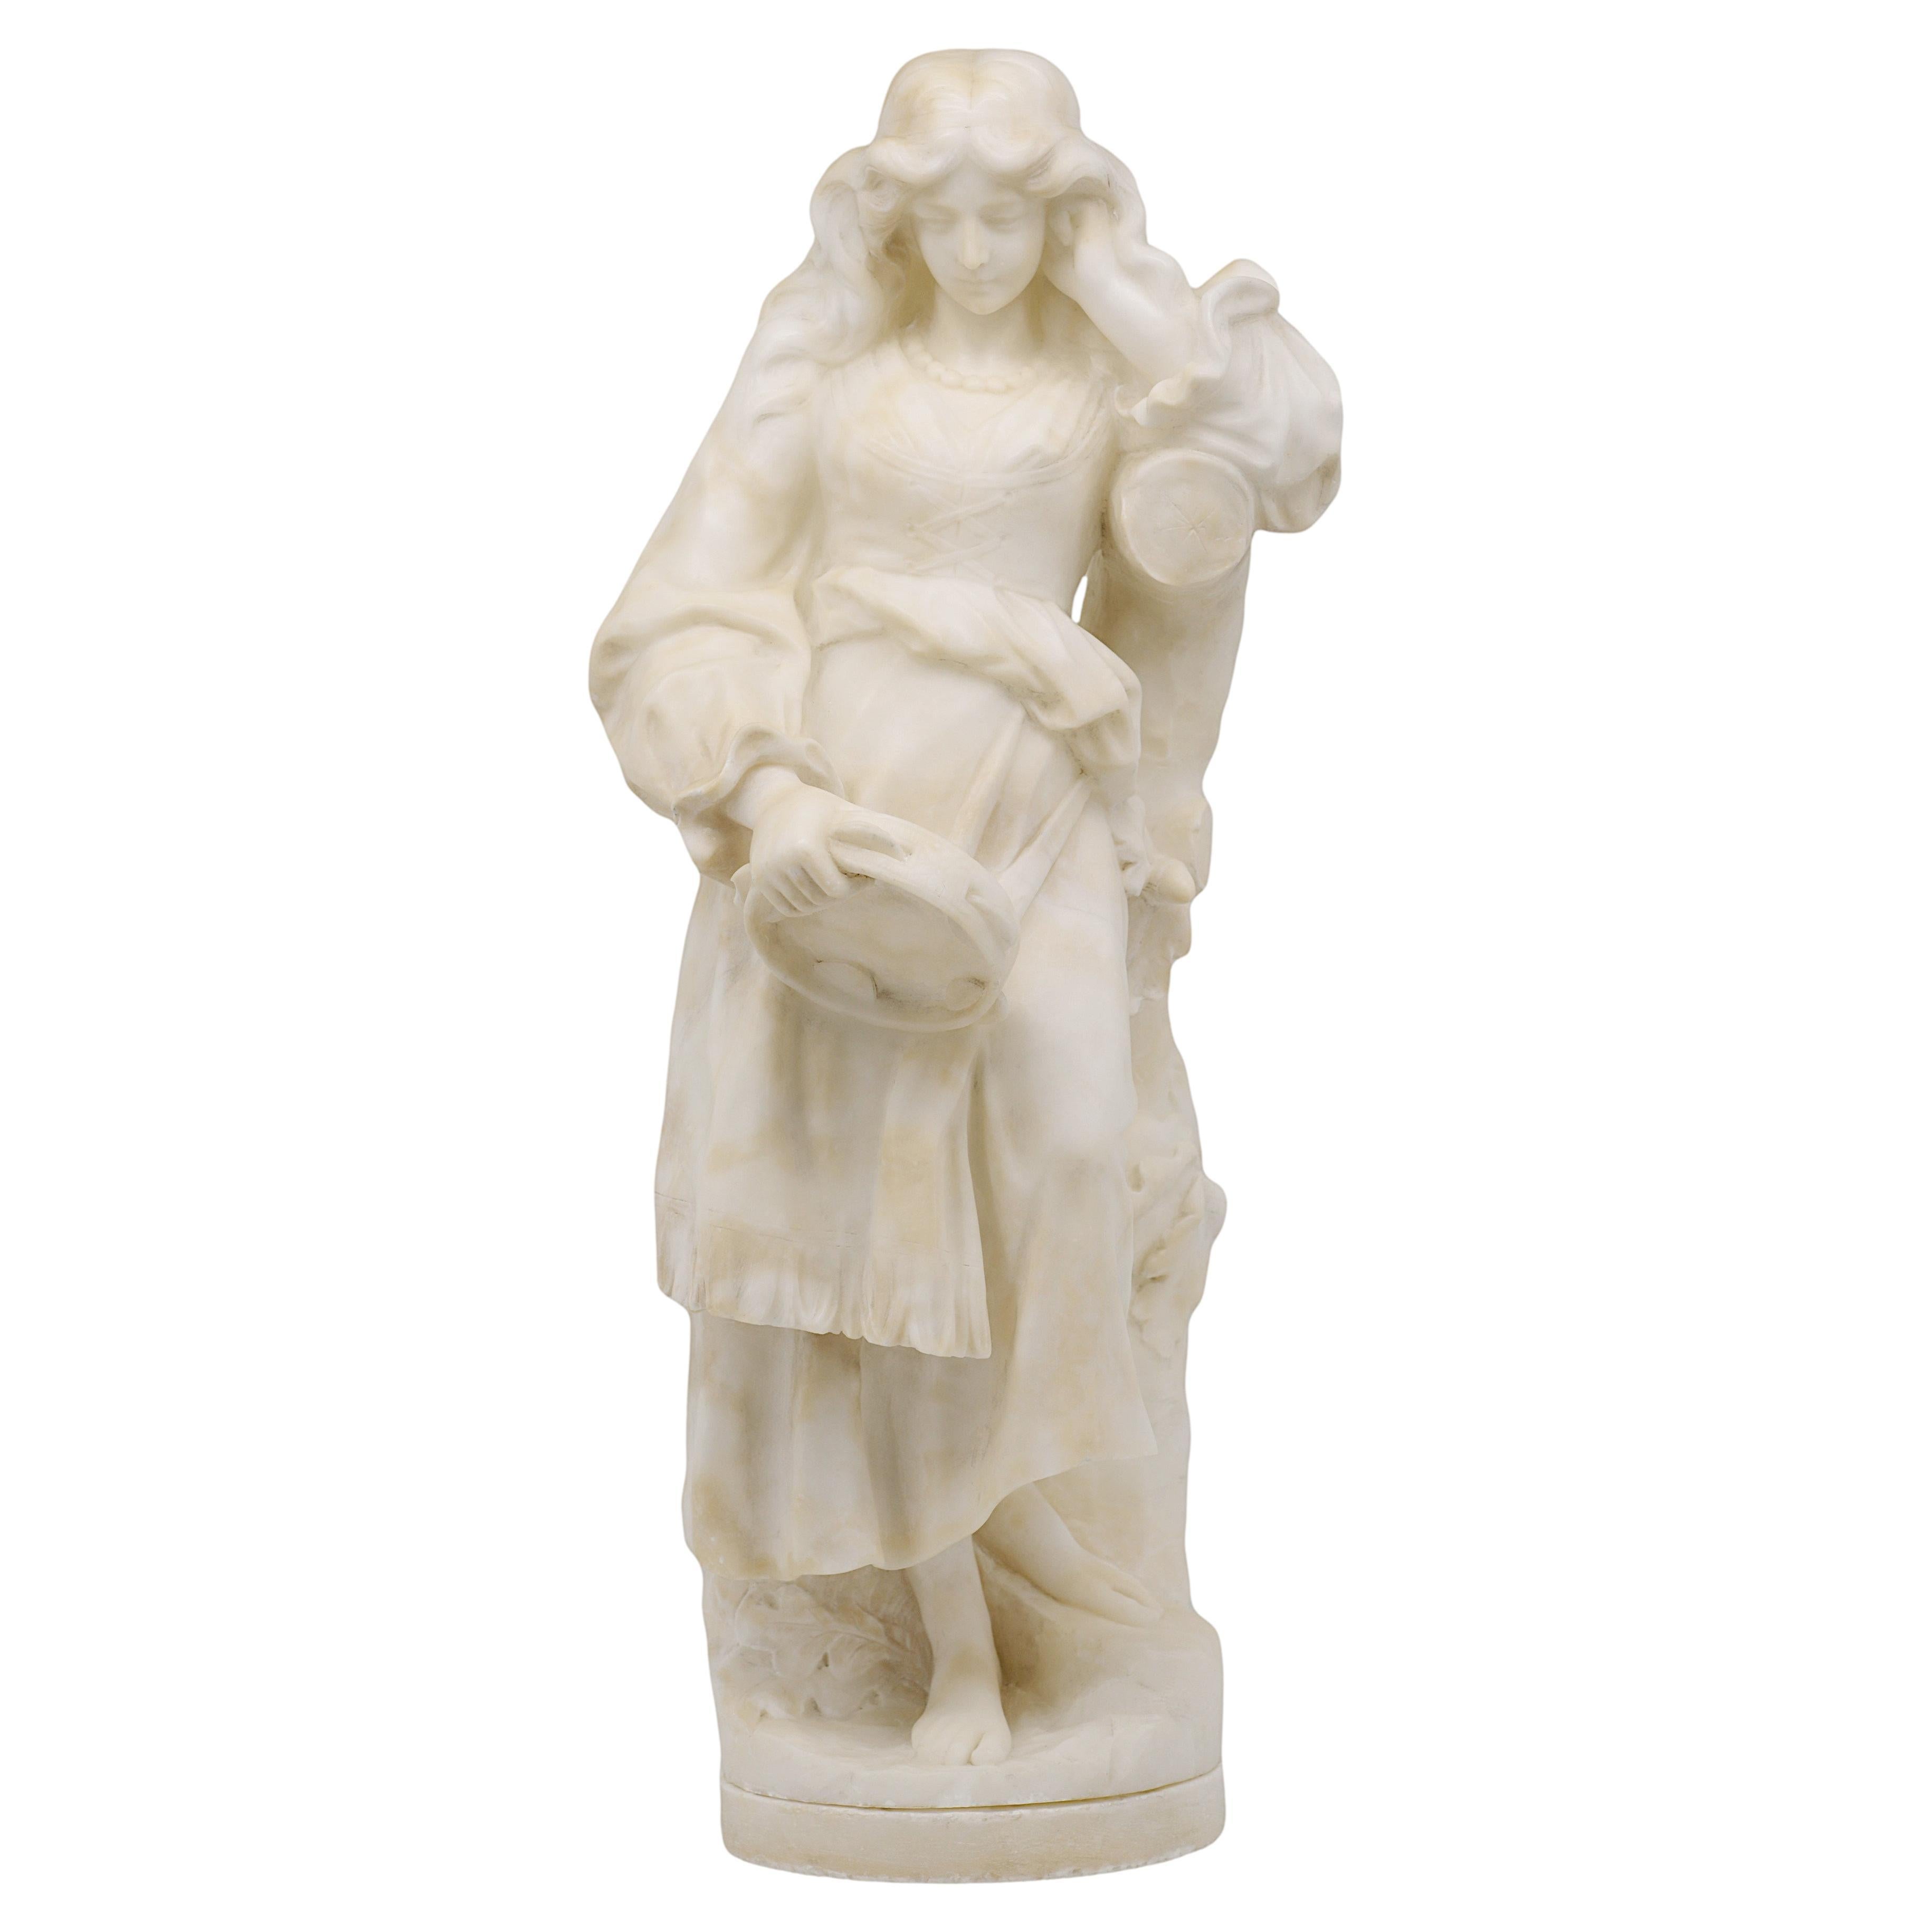 Guglielmo PUGI Young Gipsy with Tambourine Alabaster Sculpture, 1880s For Sale